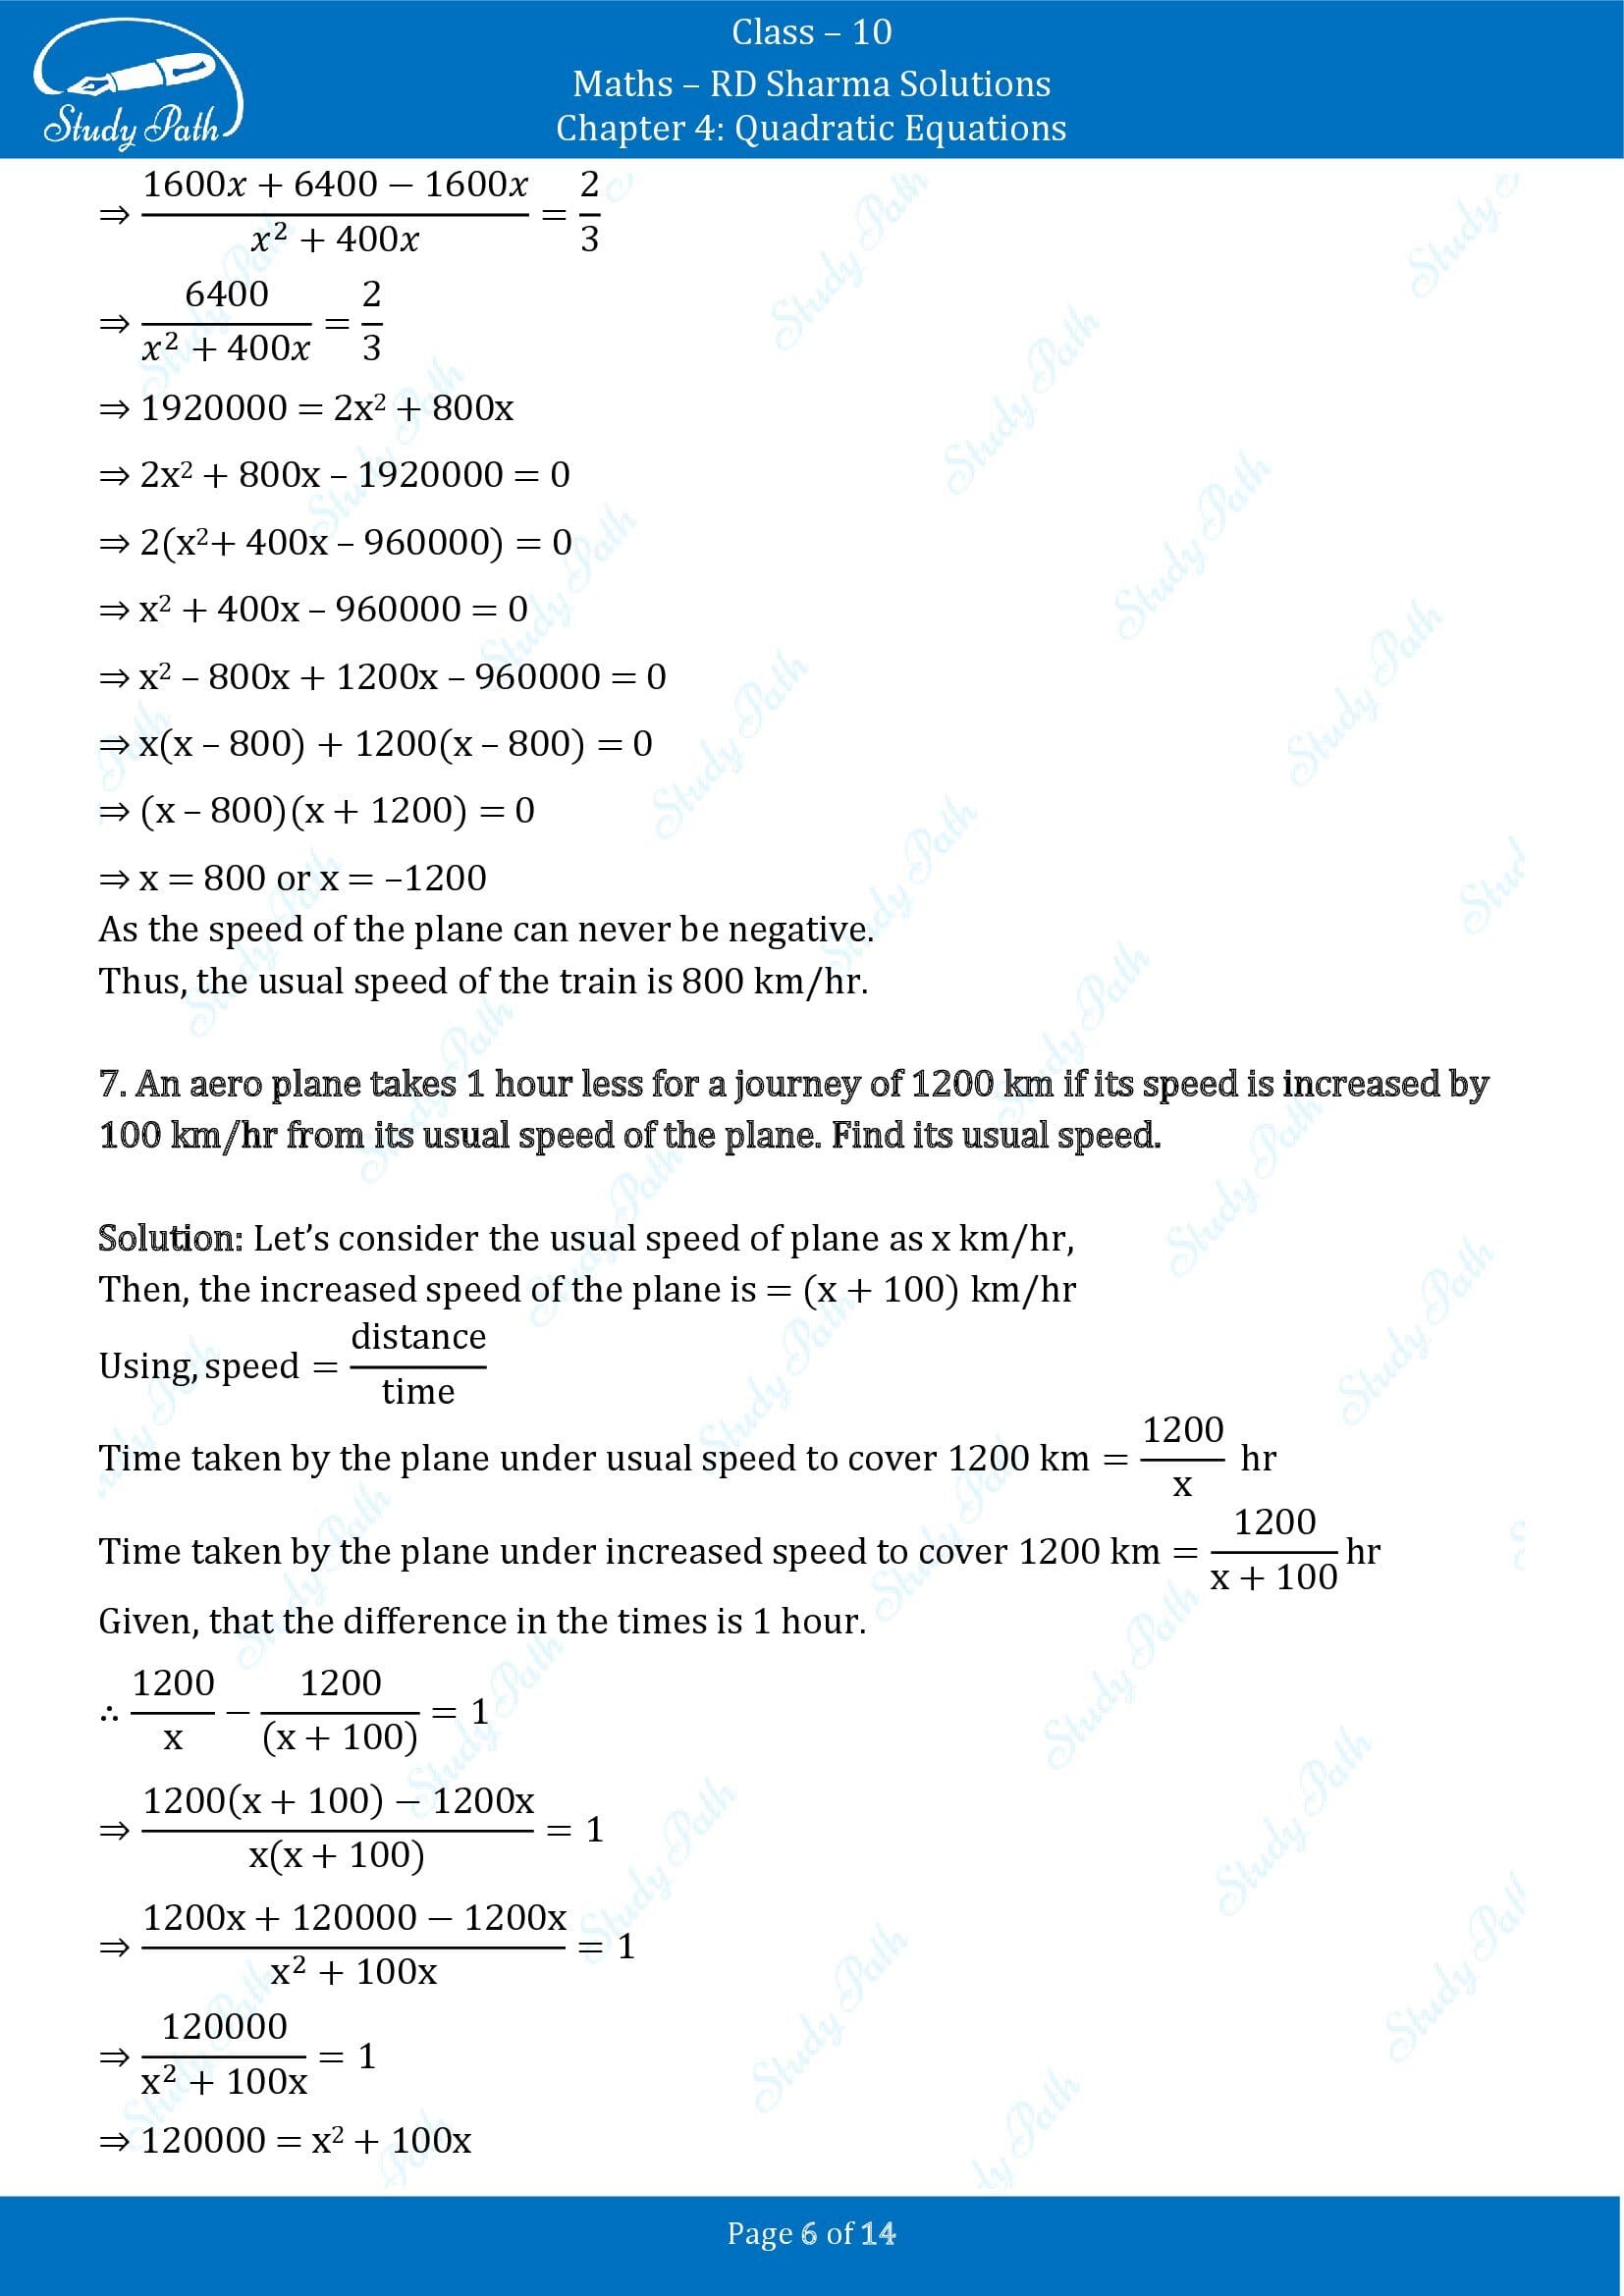 RD Sharma Solutions Class 10 Chapter 4 Quadratic Equations Exercise 4.8 00006